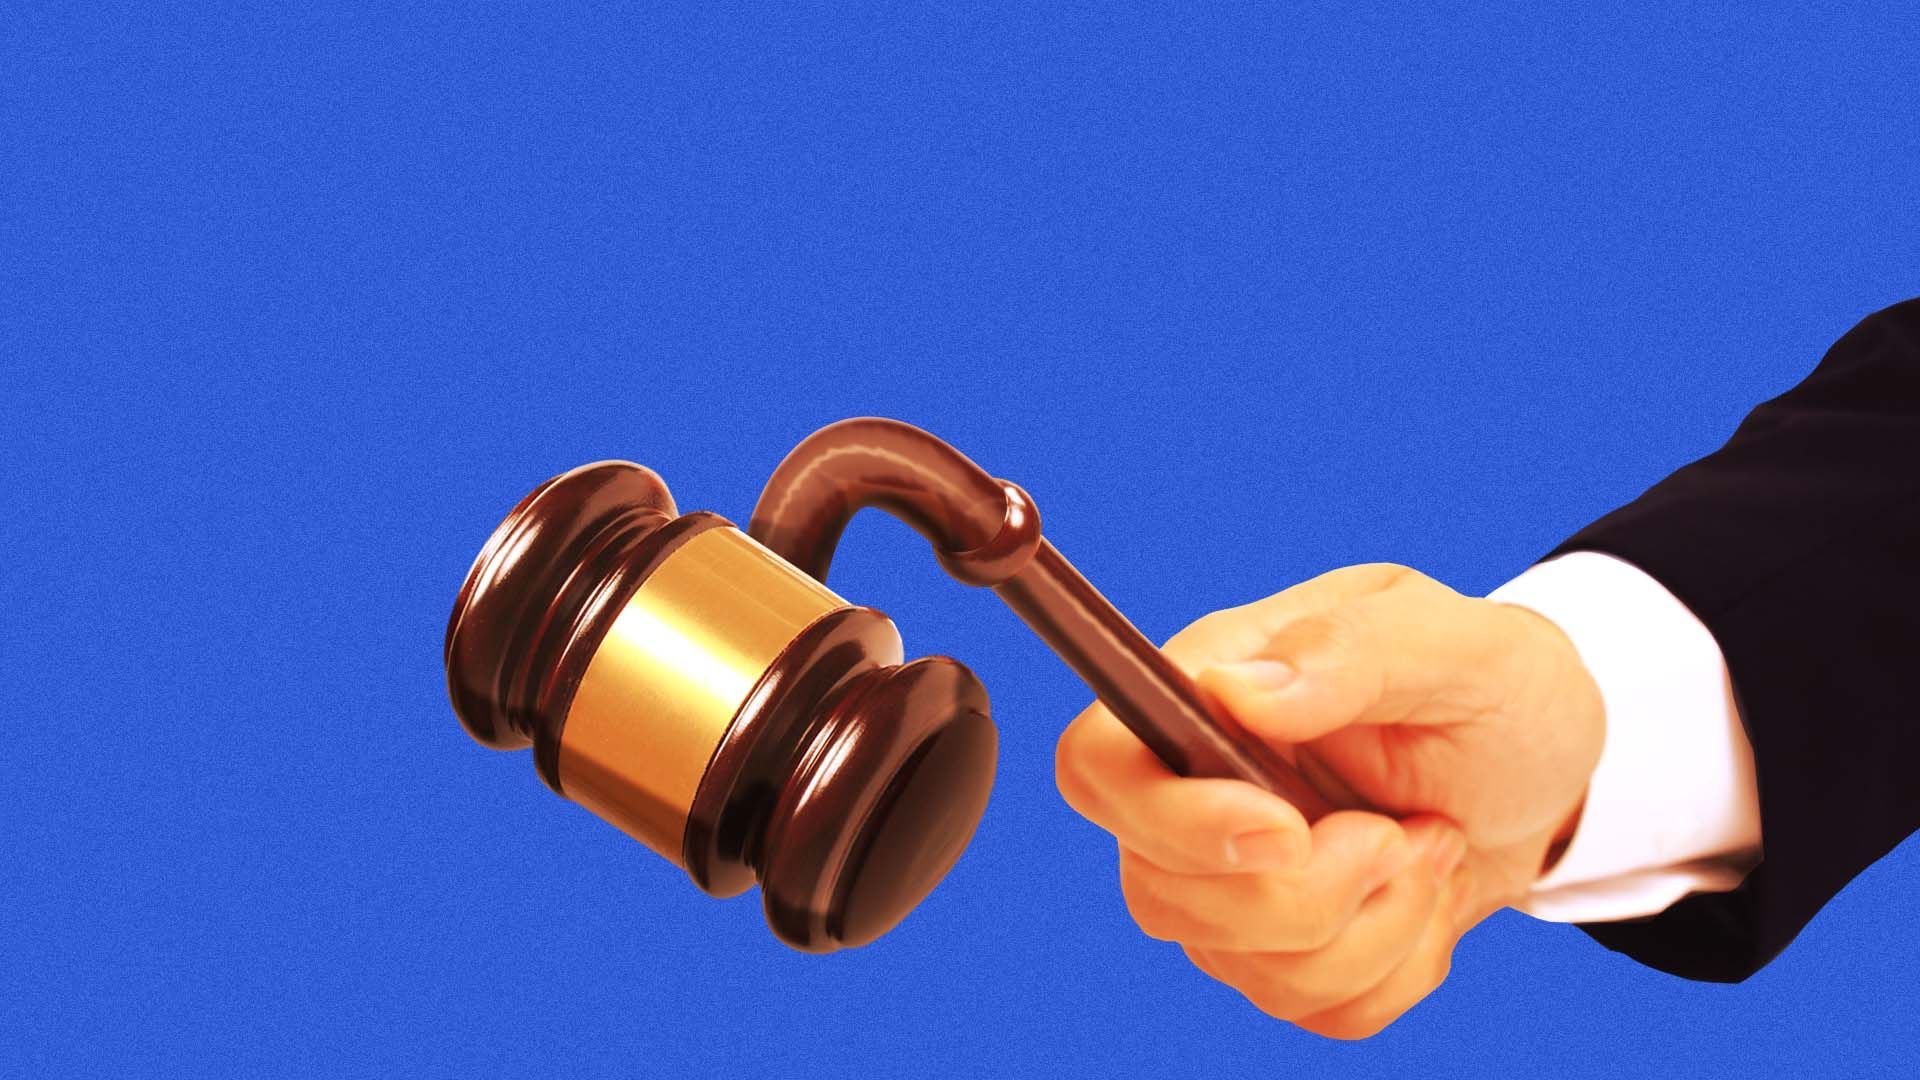 Illustration of a person holding a limp gavel